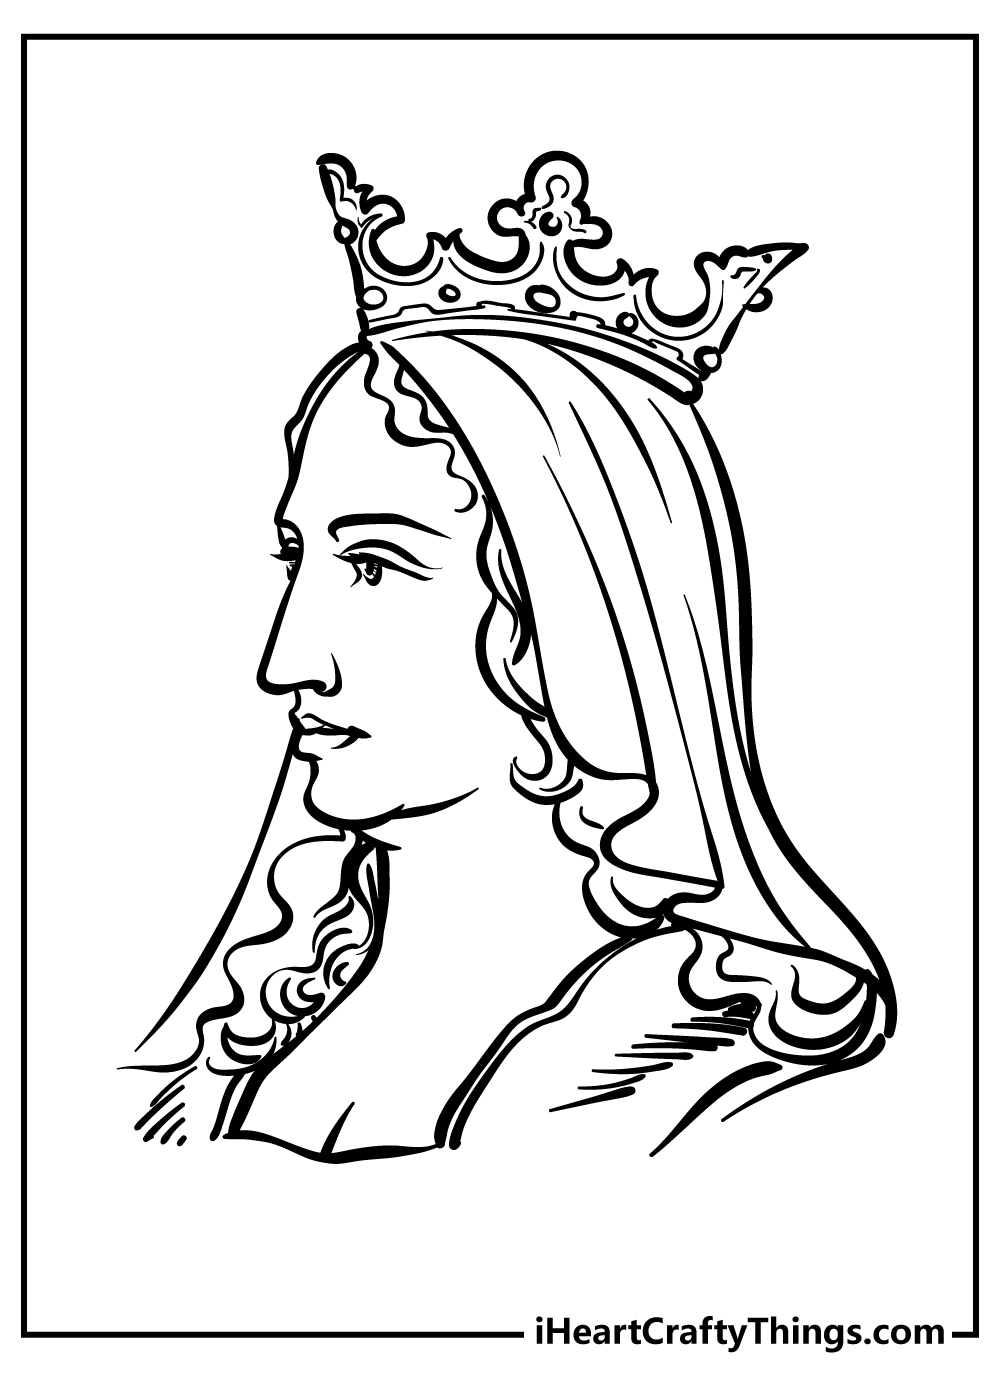 Queen Coloring Sheet for children free download